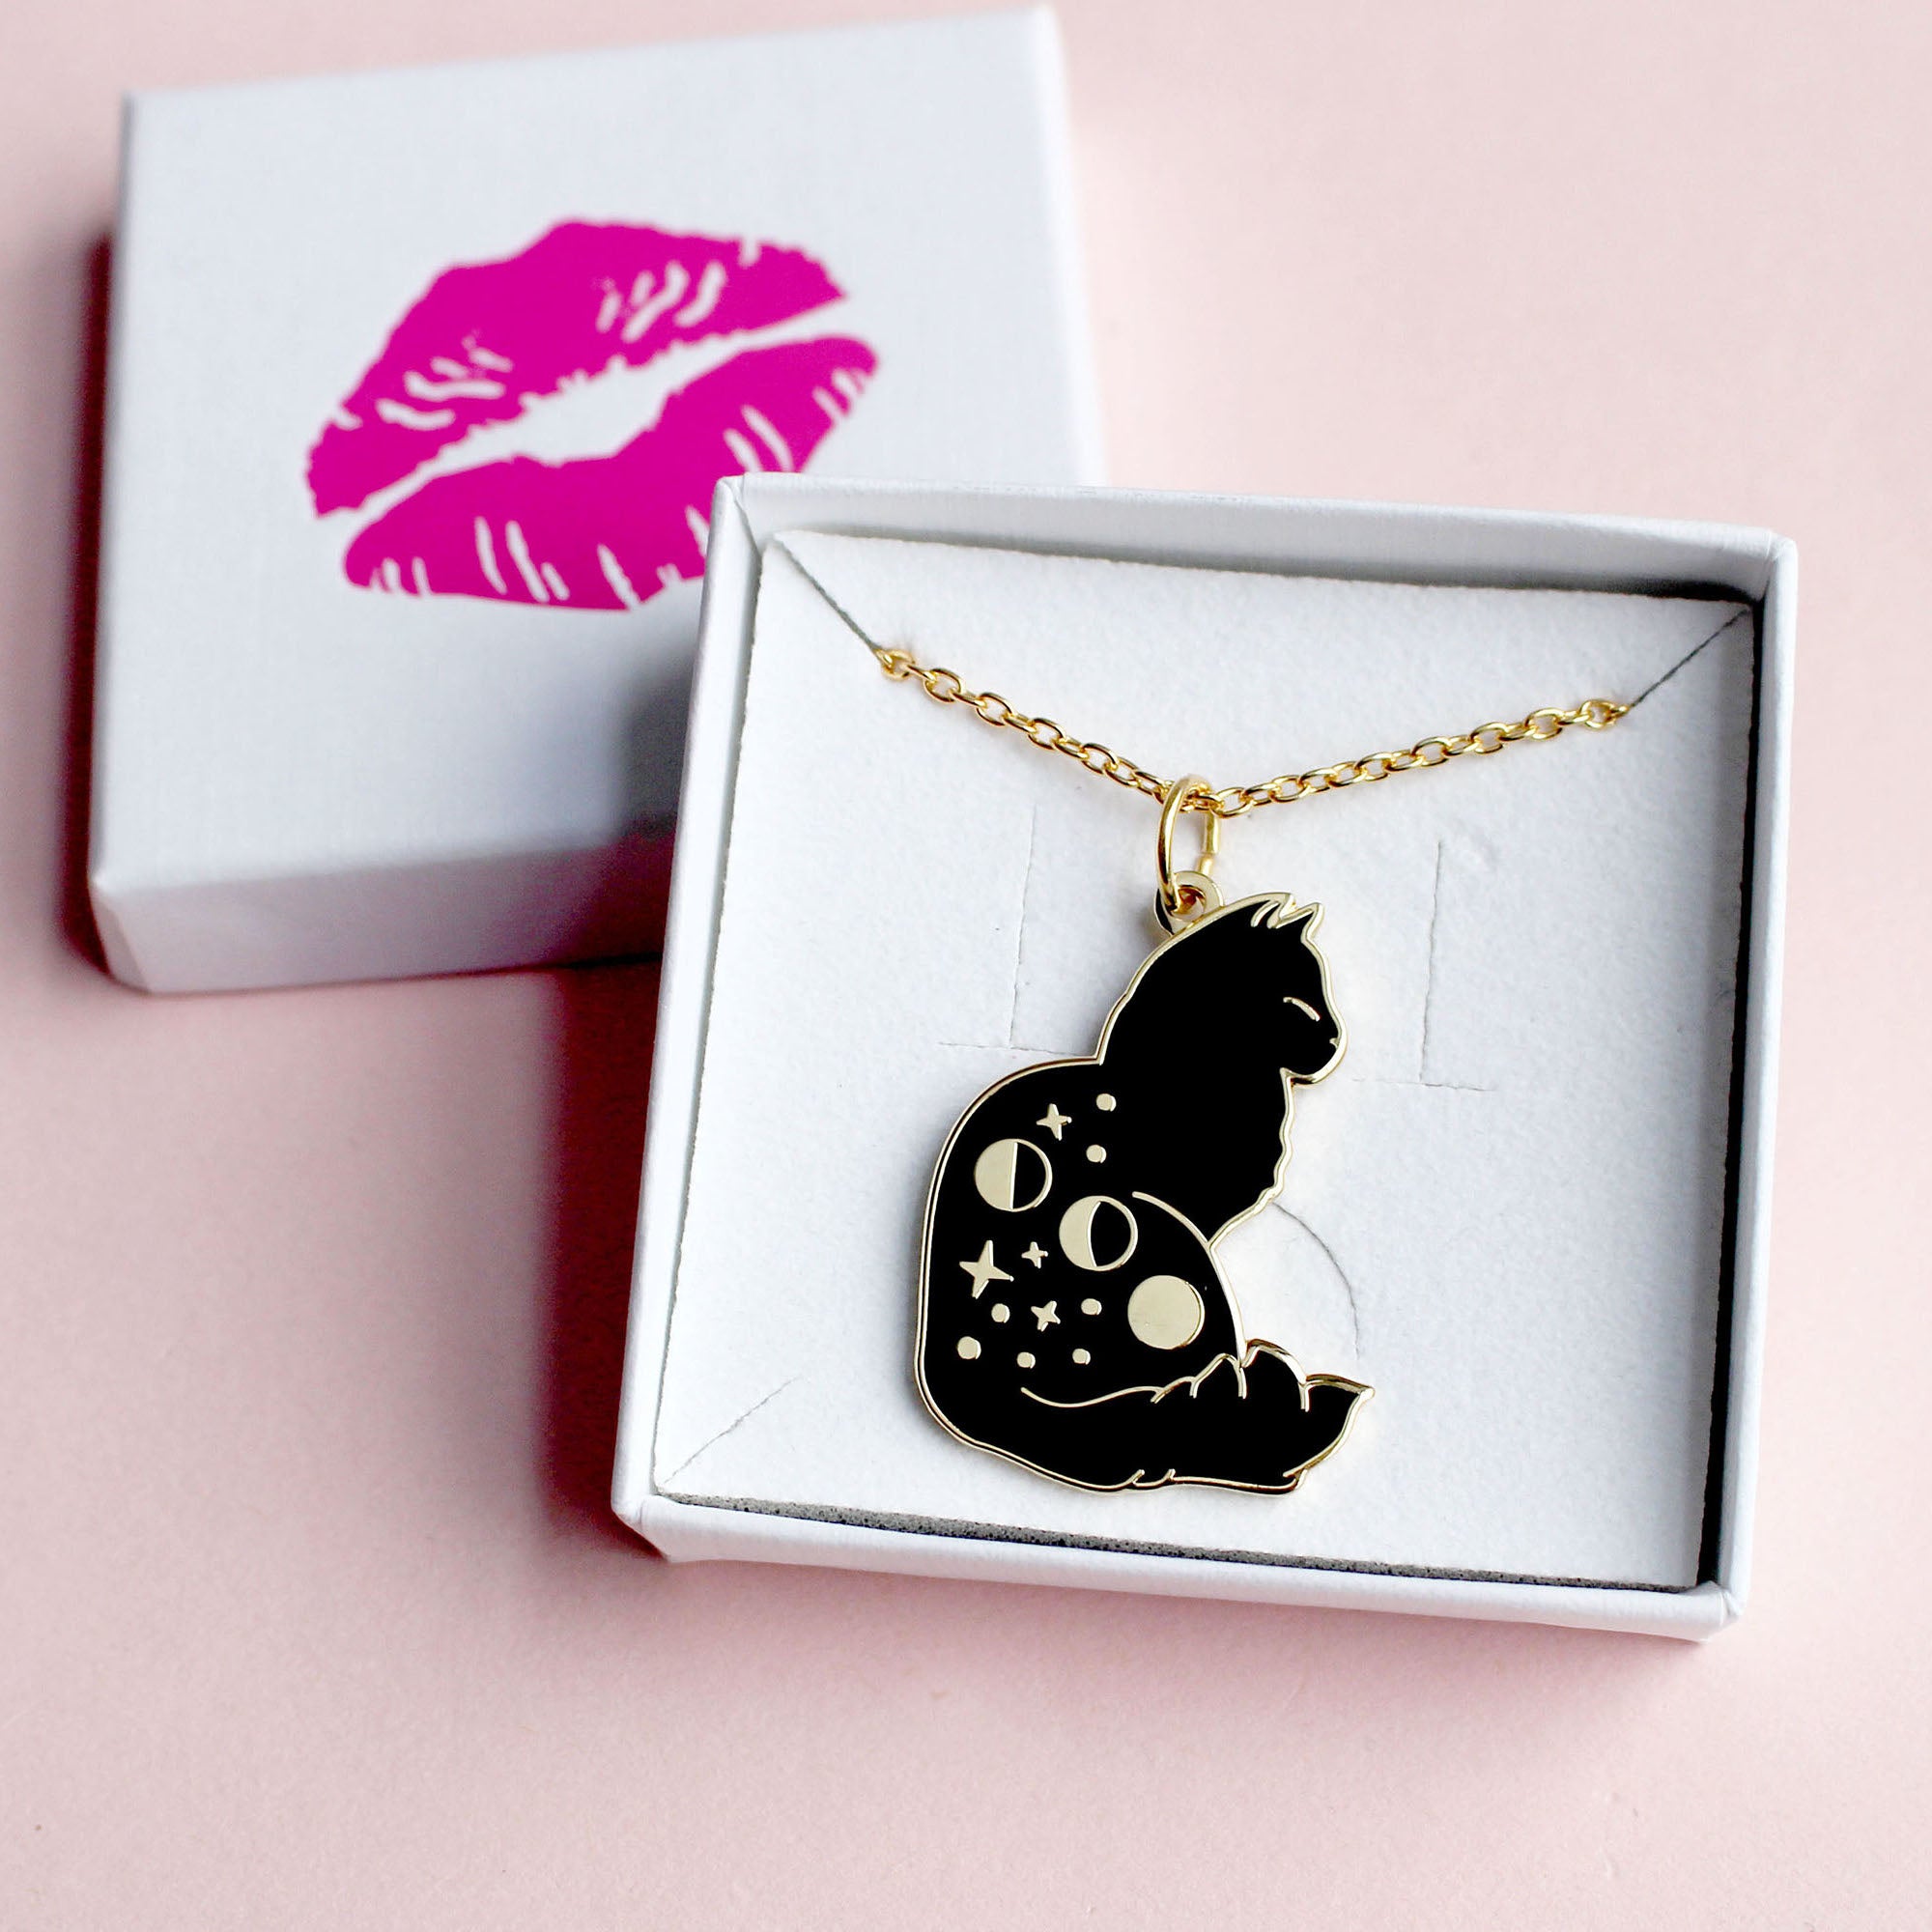 Walking Cat Necklace In Silver, Goldplate, Black or Black & White - amanda  coleman jewellery